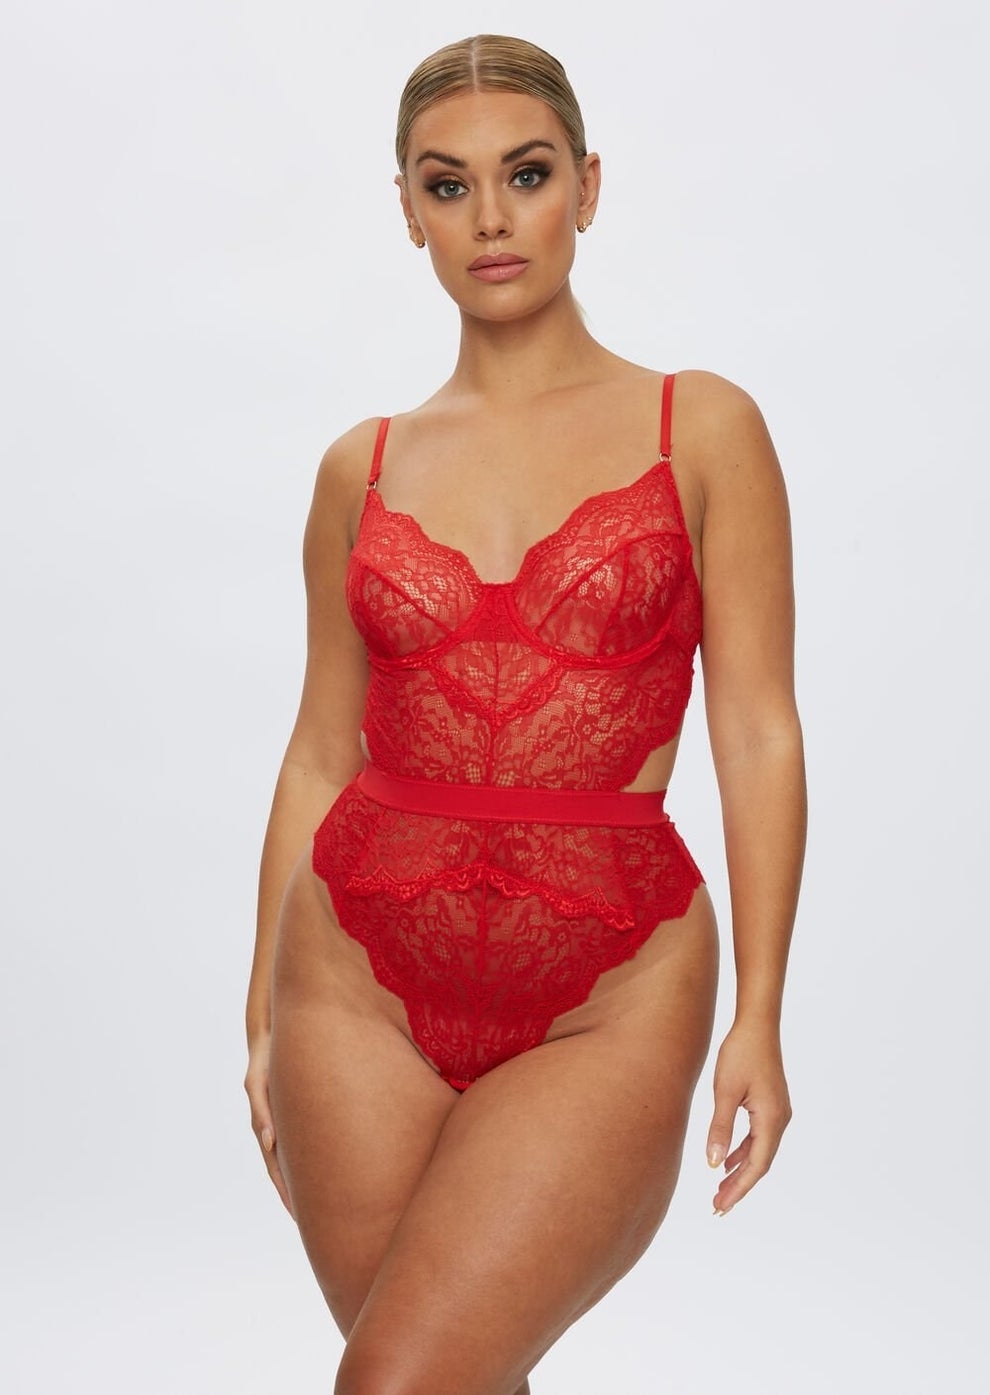 Asos Lingerie - The Best Buys - FLAVOURMAG